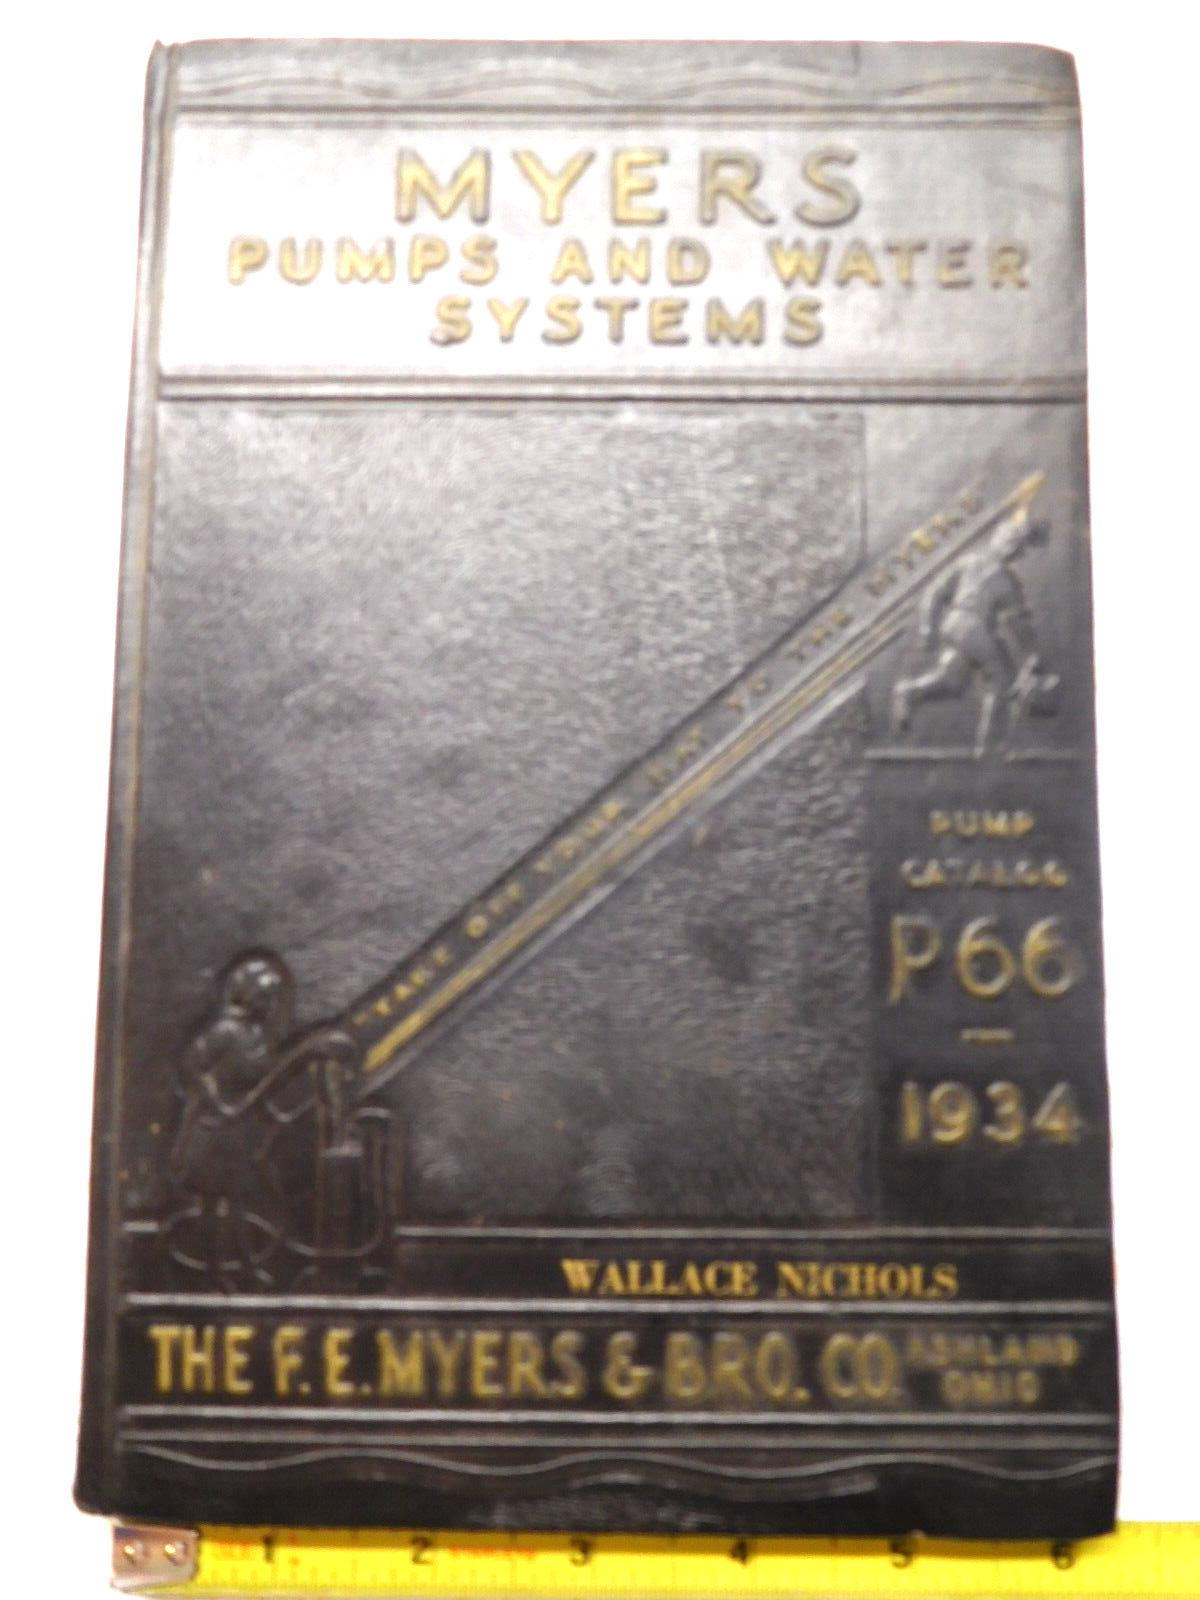 Rare Vintage 1934 Embossed Myers Pumps & Water Systems Catalog